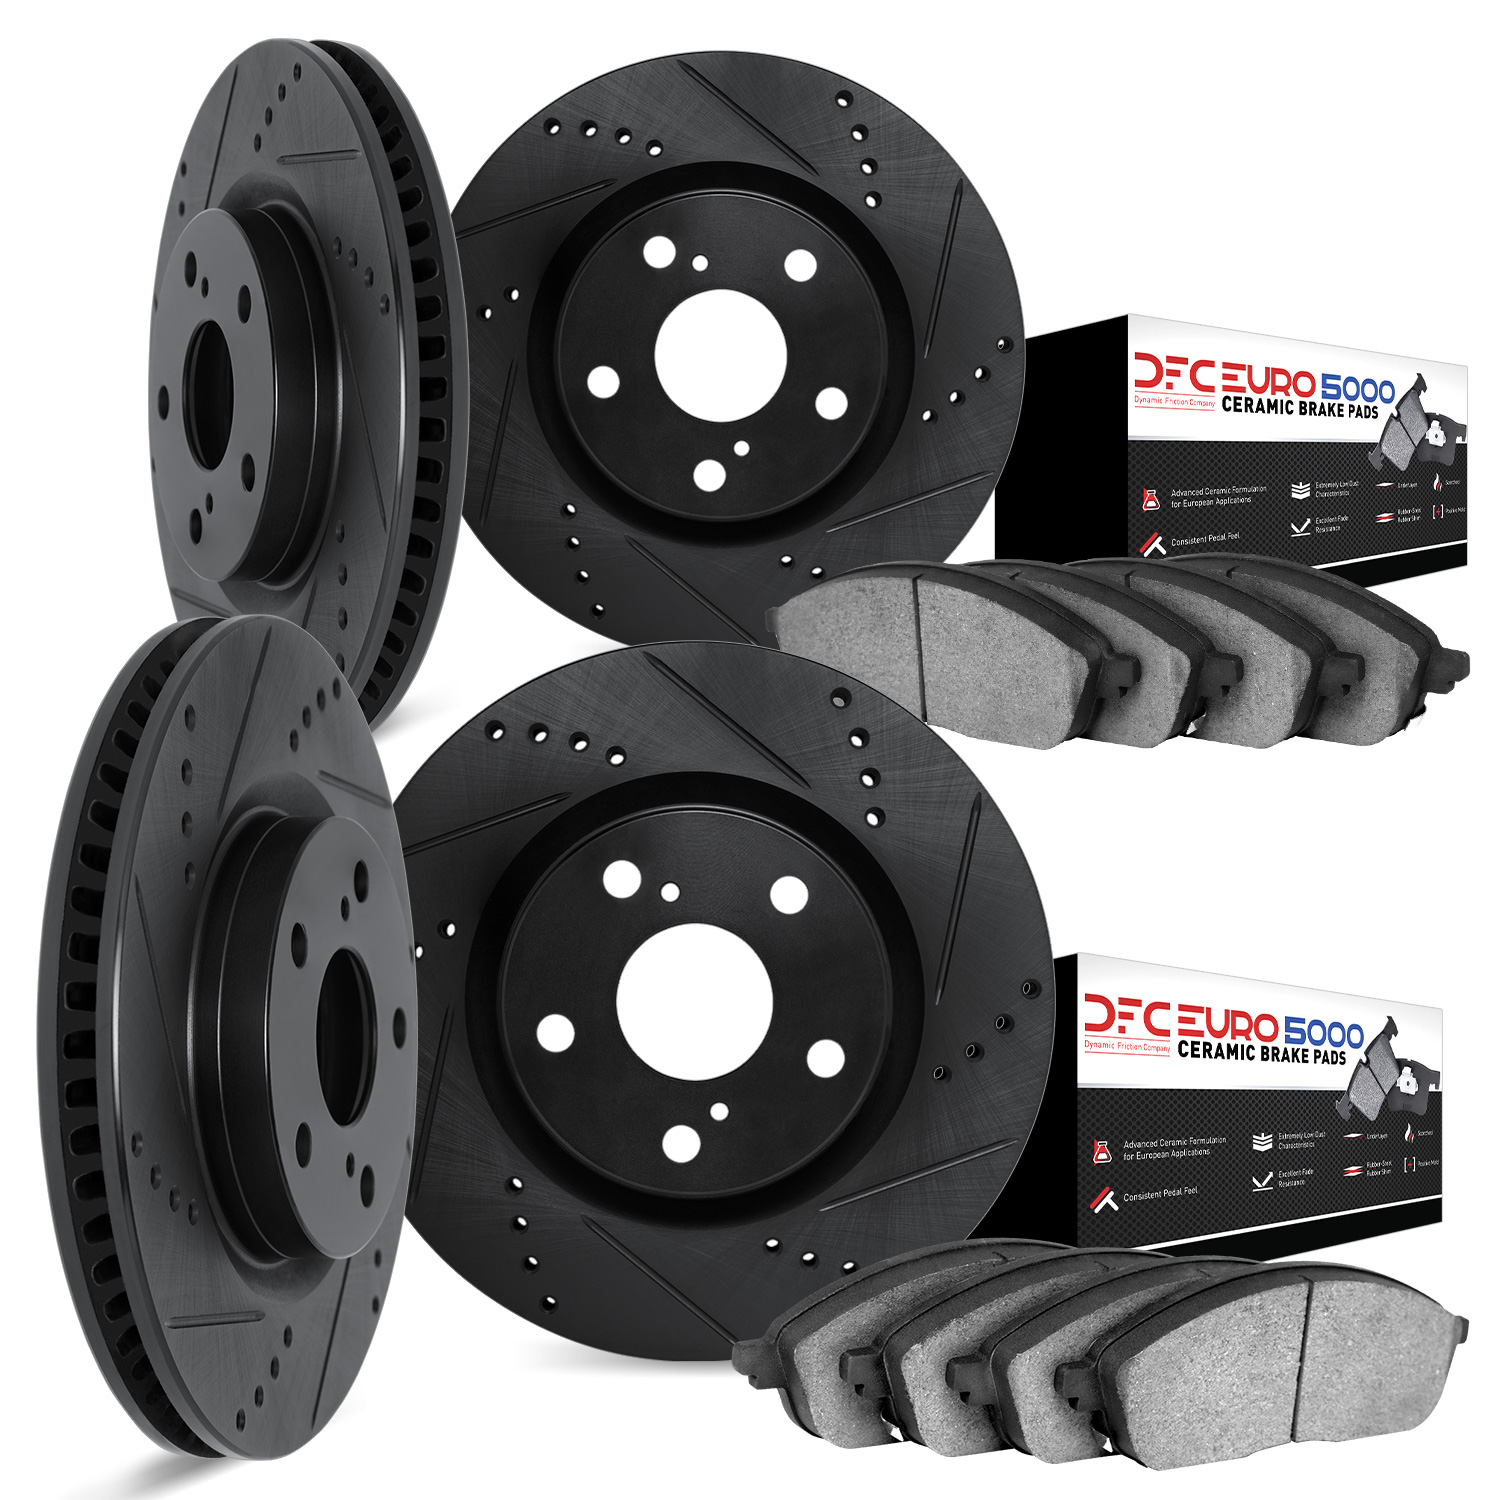 8604-31022 Drilled/Slotted Brake Rotors w/5000 Euro Ceramic Brake Pads Kit [Black], 2007-2015 BMW, Position: Front and Rear